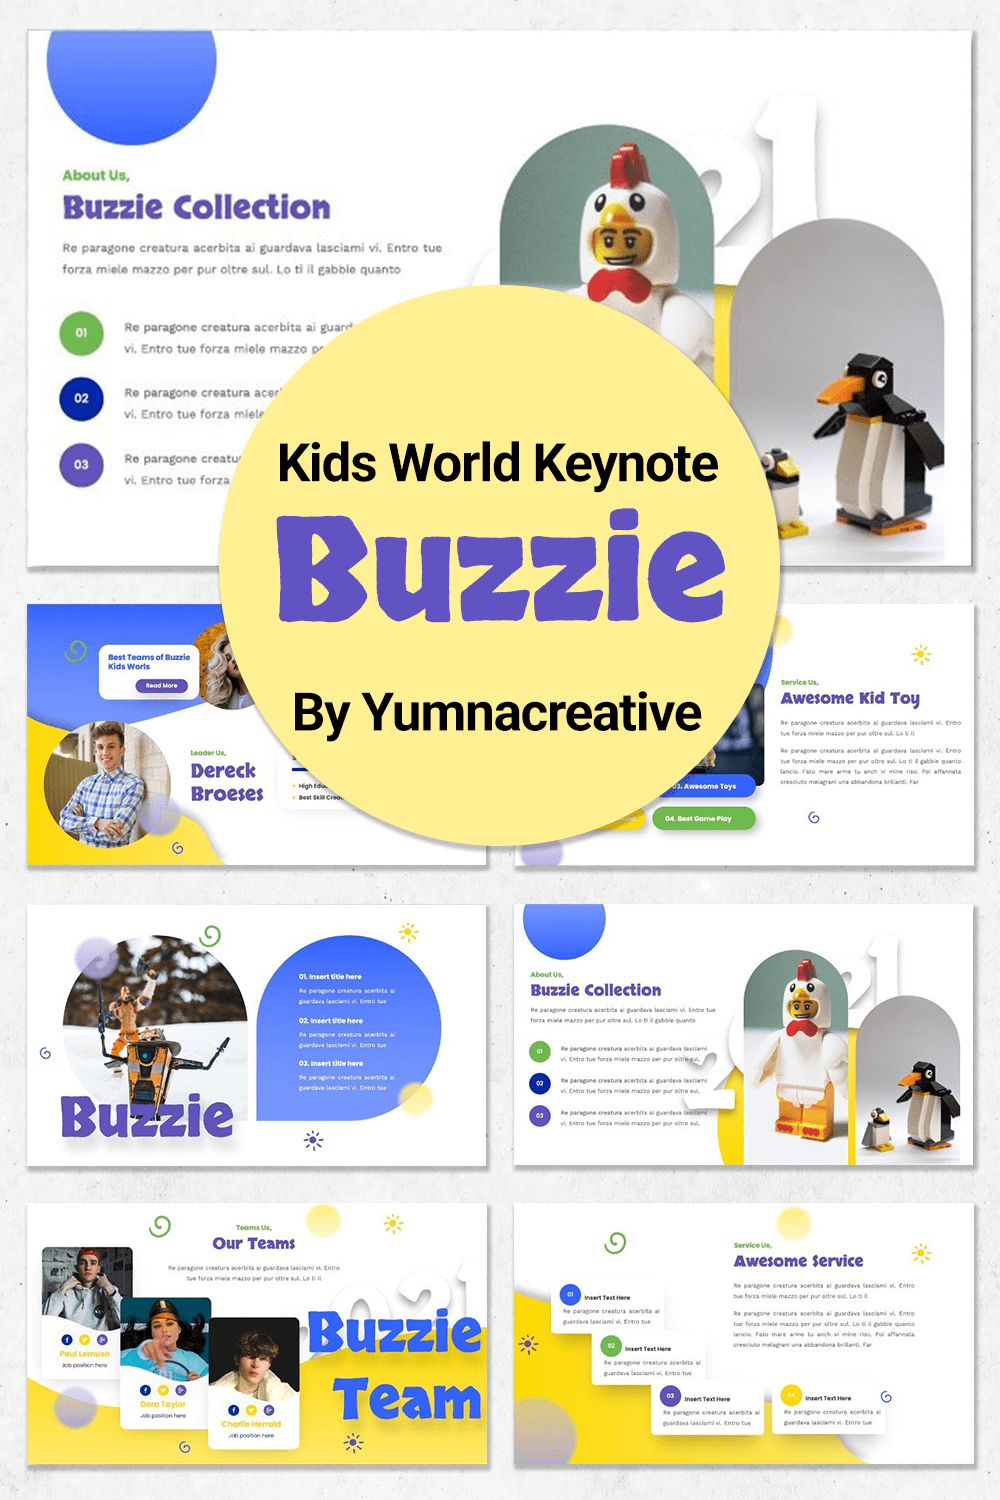 Buzzie - Kids World Keynote in different colors.